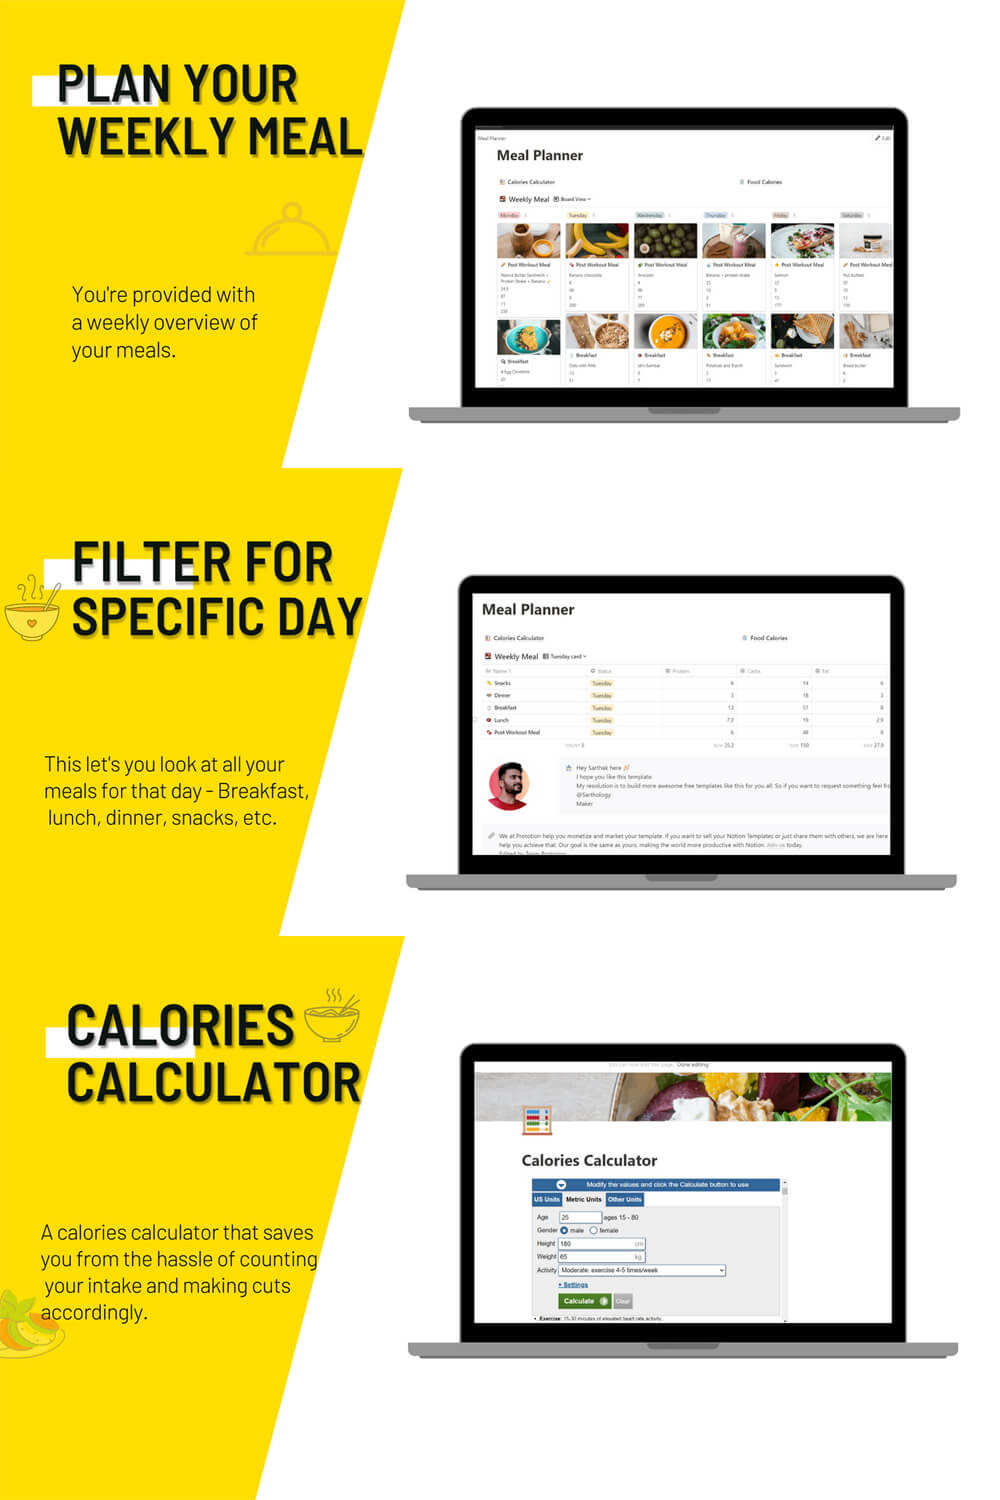 Big screenshot with laptop and discription "You're provided with a weekly overview of your meals, Filter for specific day, Calories calculator".